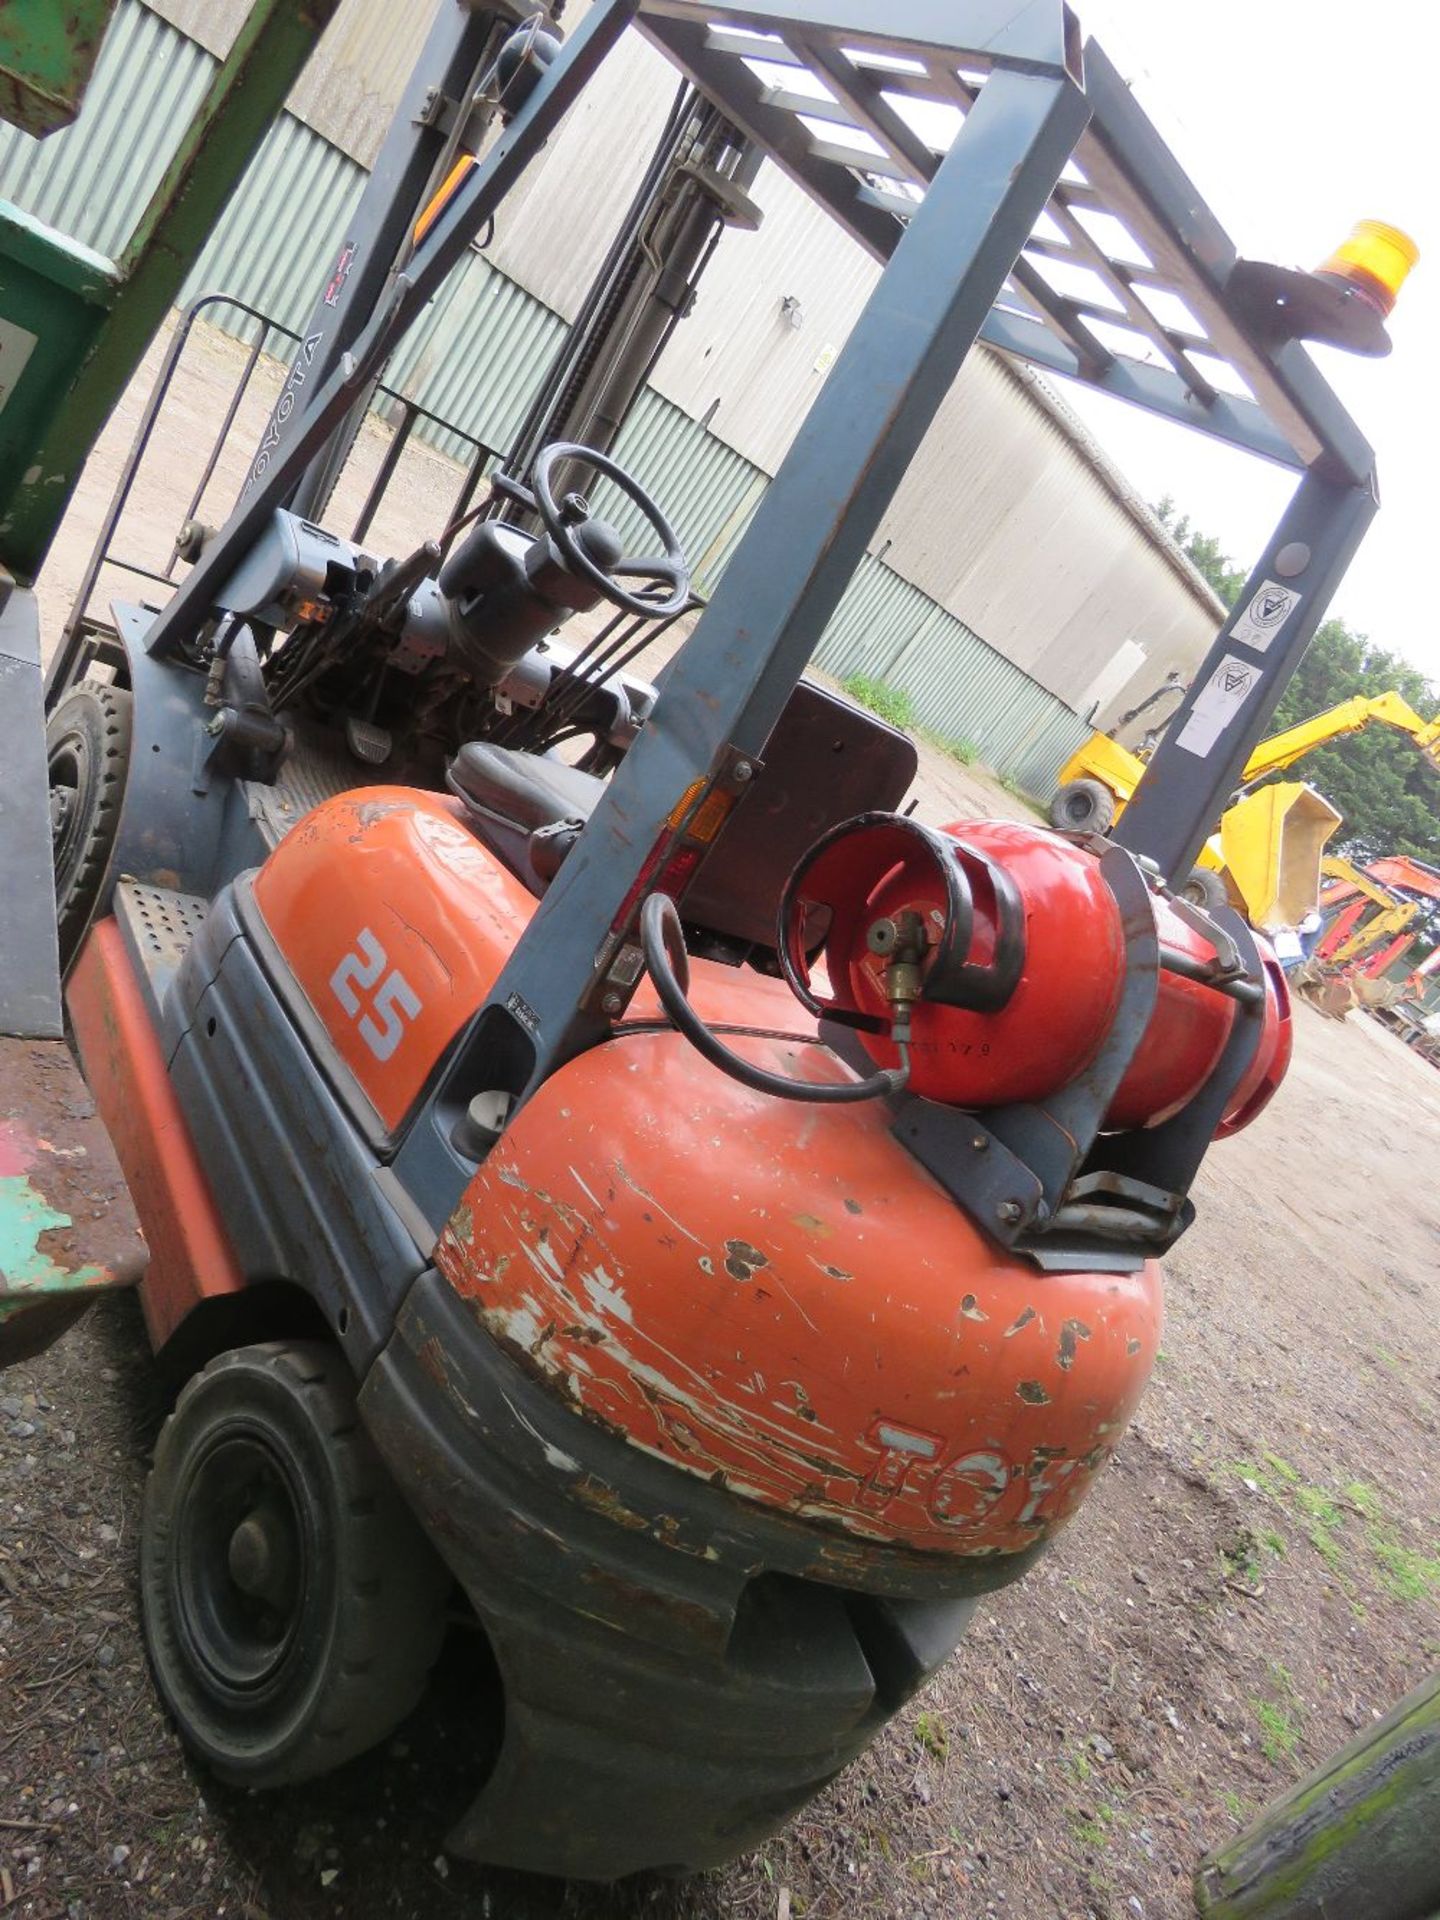 TOYOTA 25 GAS FORKLIFT TRUCK WITH SIDE SHIFT. 8994 REC HOURS. SN:406FGF25@21005 WHEN TESTED WAS SEE - Image 5 of 11